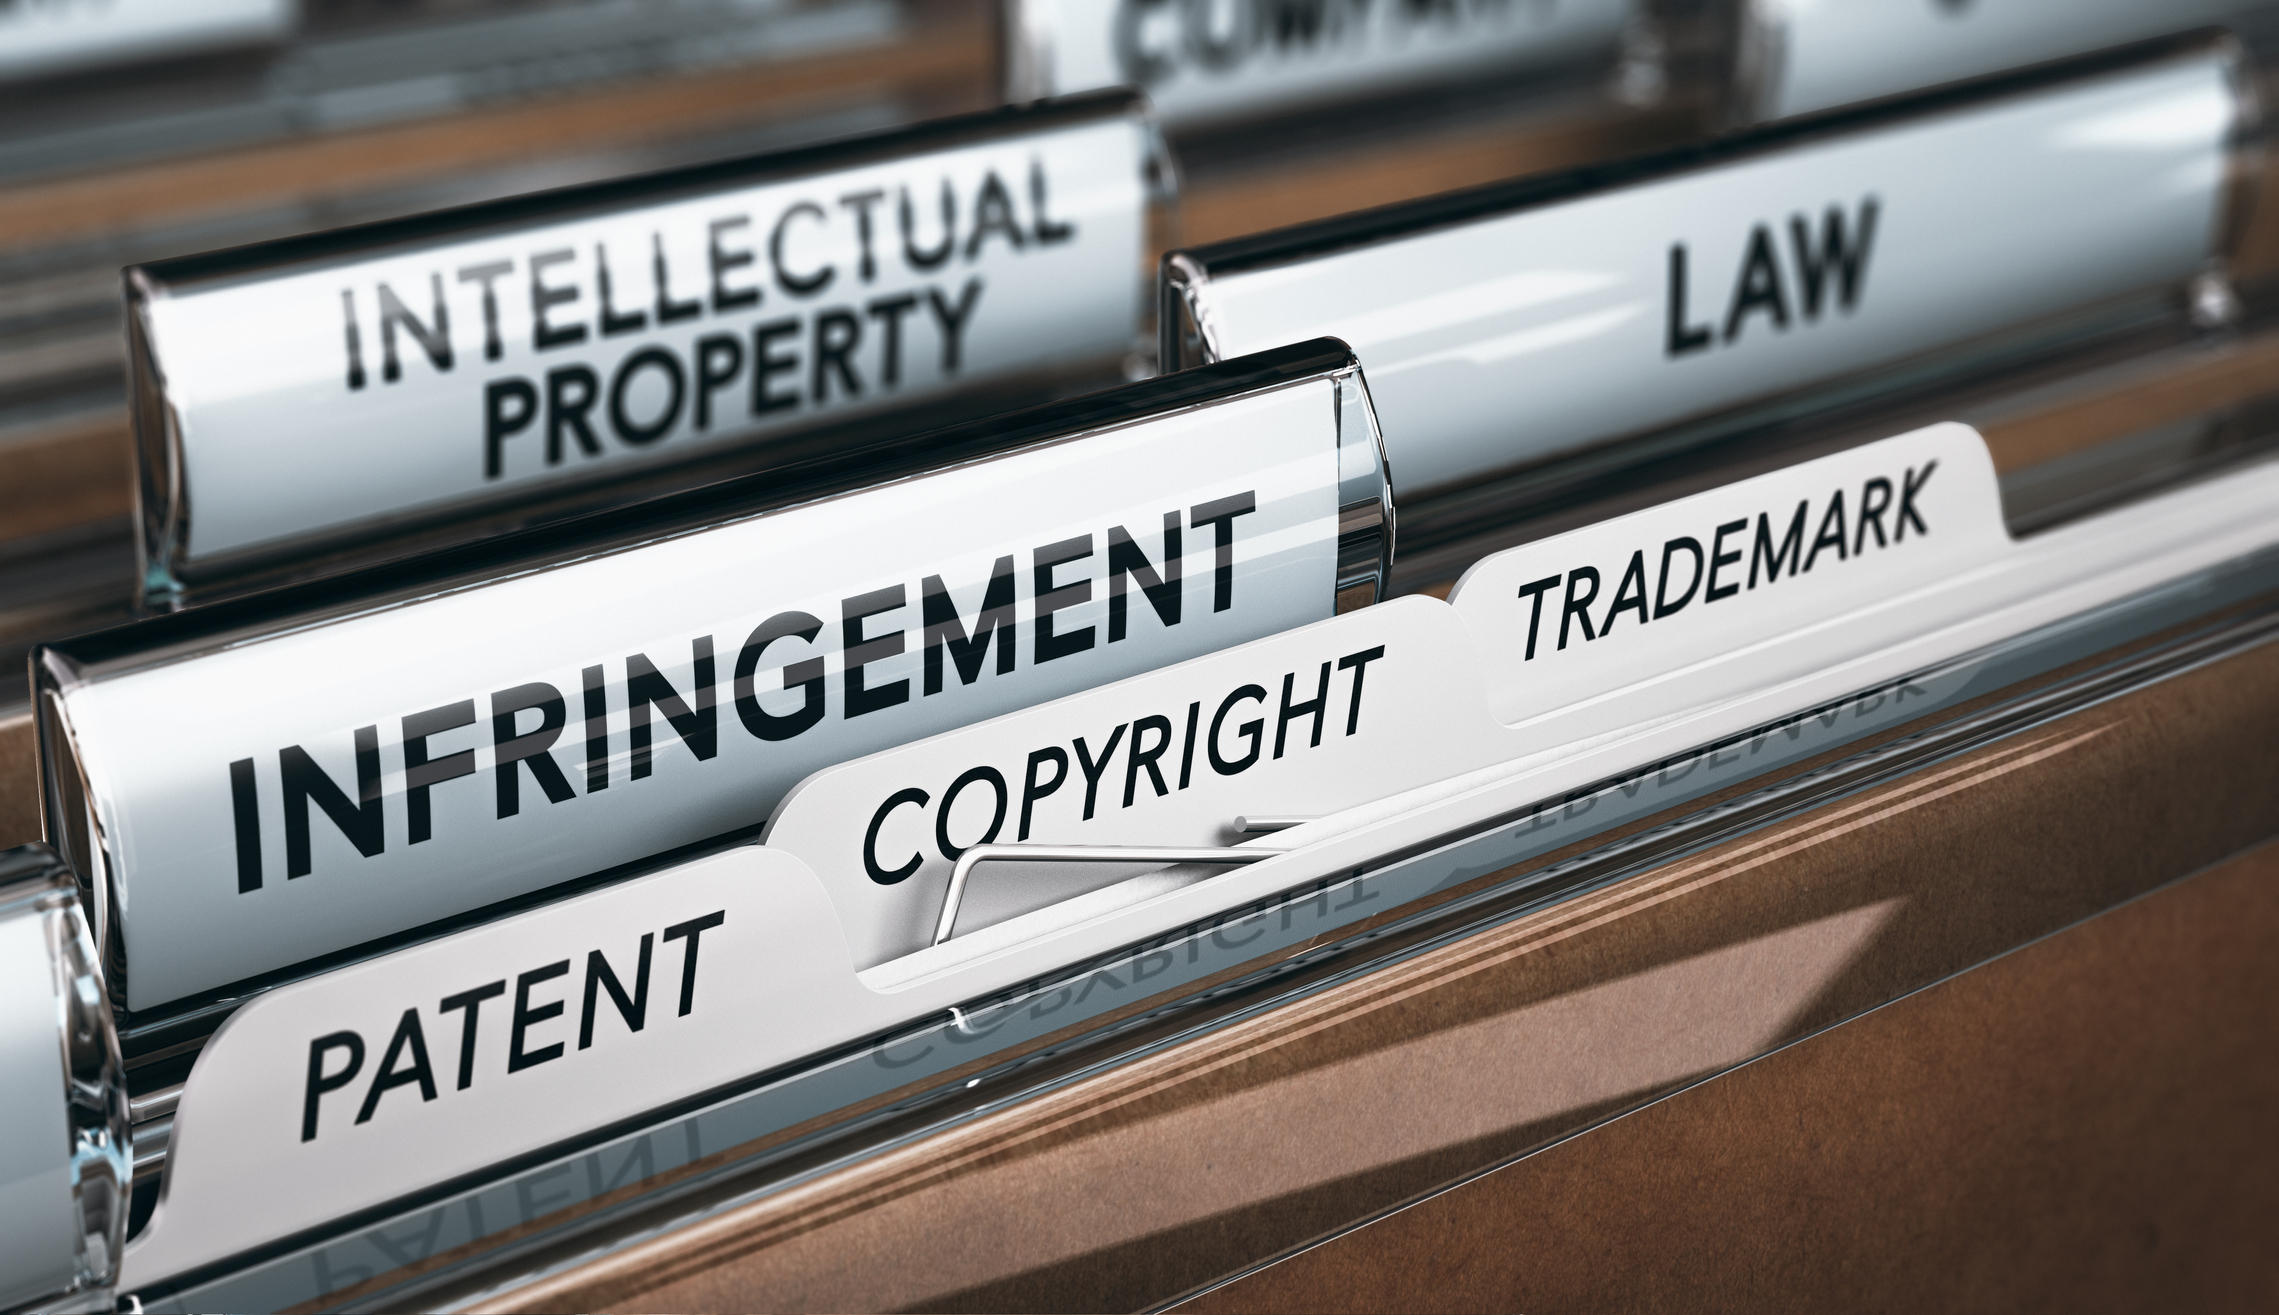 Don't let infringement threats hinder your progress. Shore IP Group's vigilant team conducts thorough IP audits and enforcement actions, safeguarding your rights and deterring potential violators.